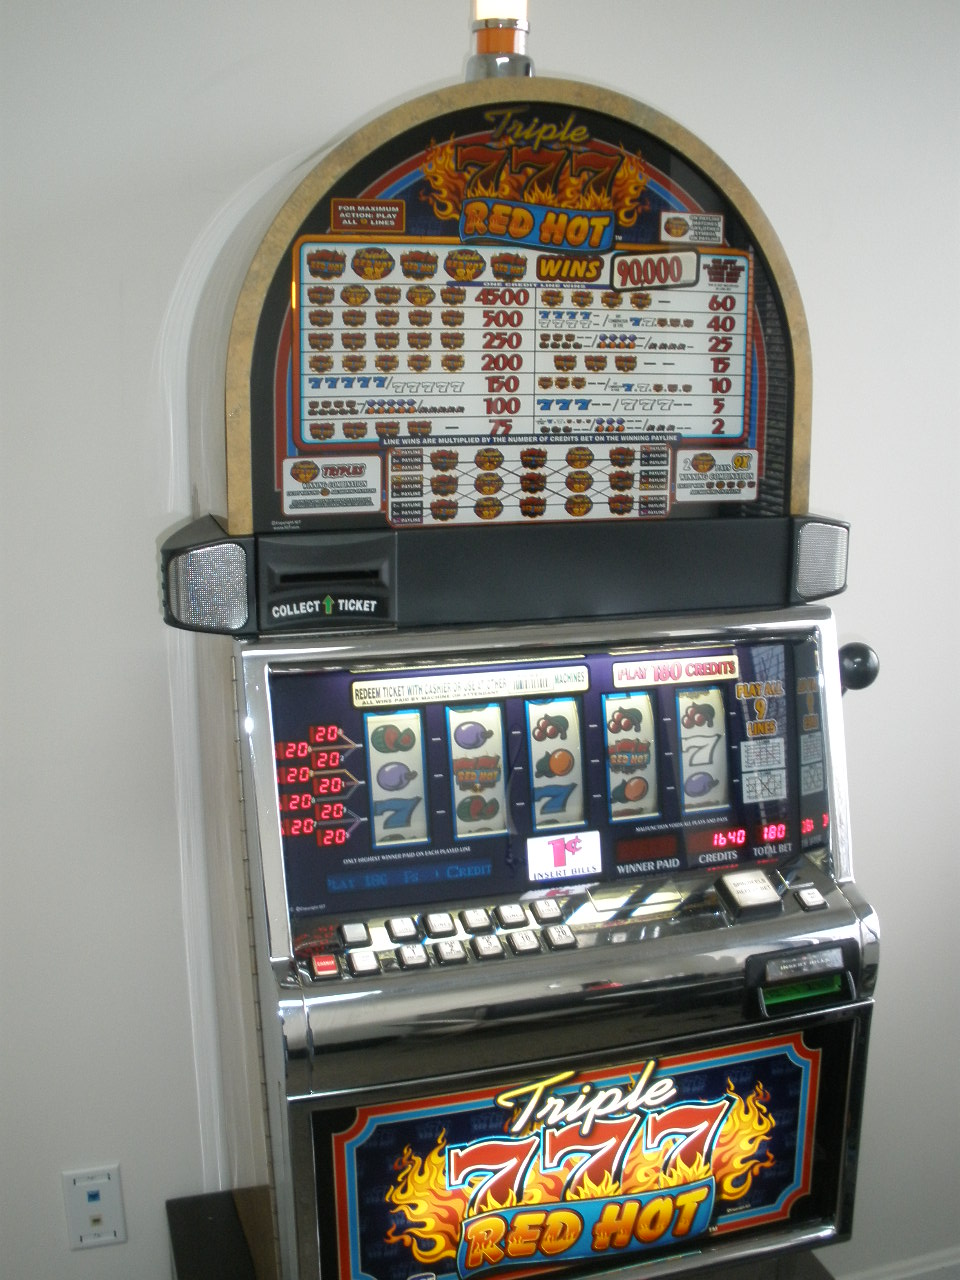 Kissimmee triple red hot 777 slot machine for sale